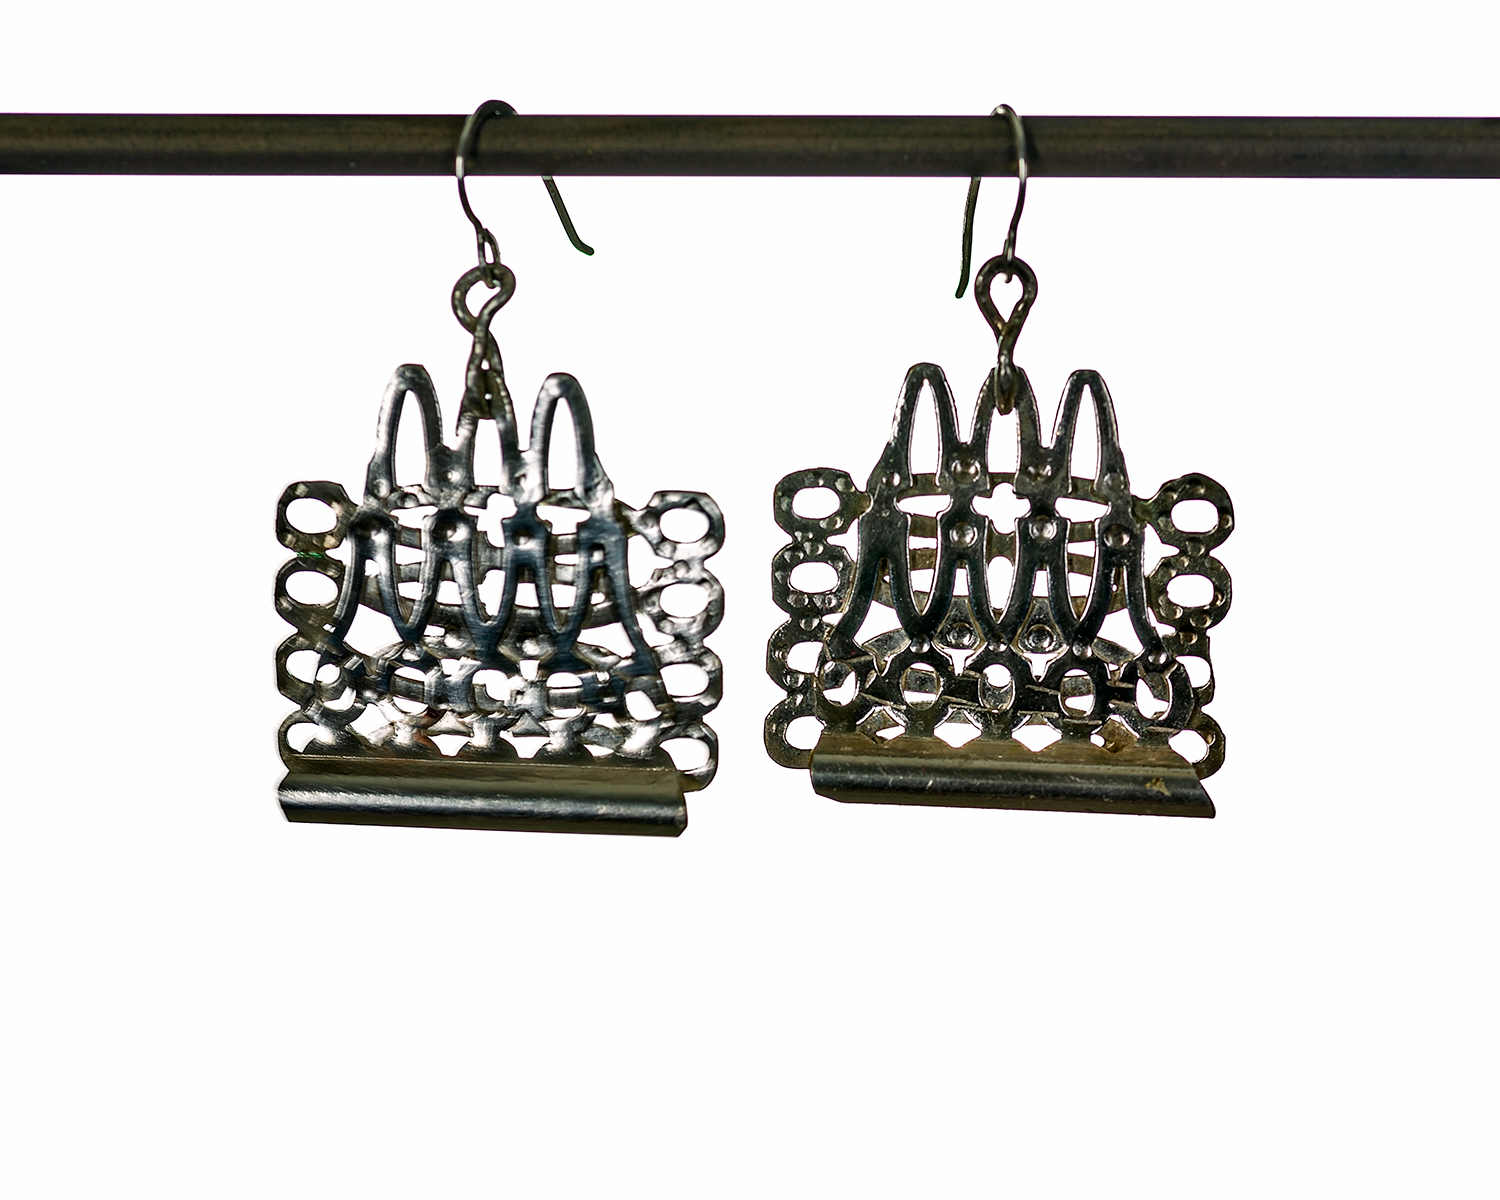 DOUBLE DIP EARRINGS ~ Repurposed hand-forged vintage silver